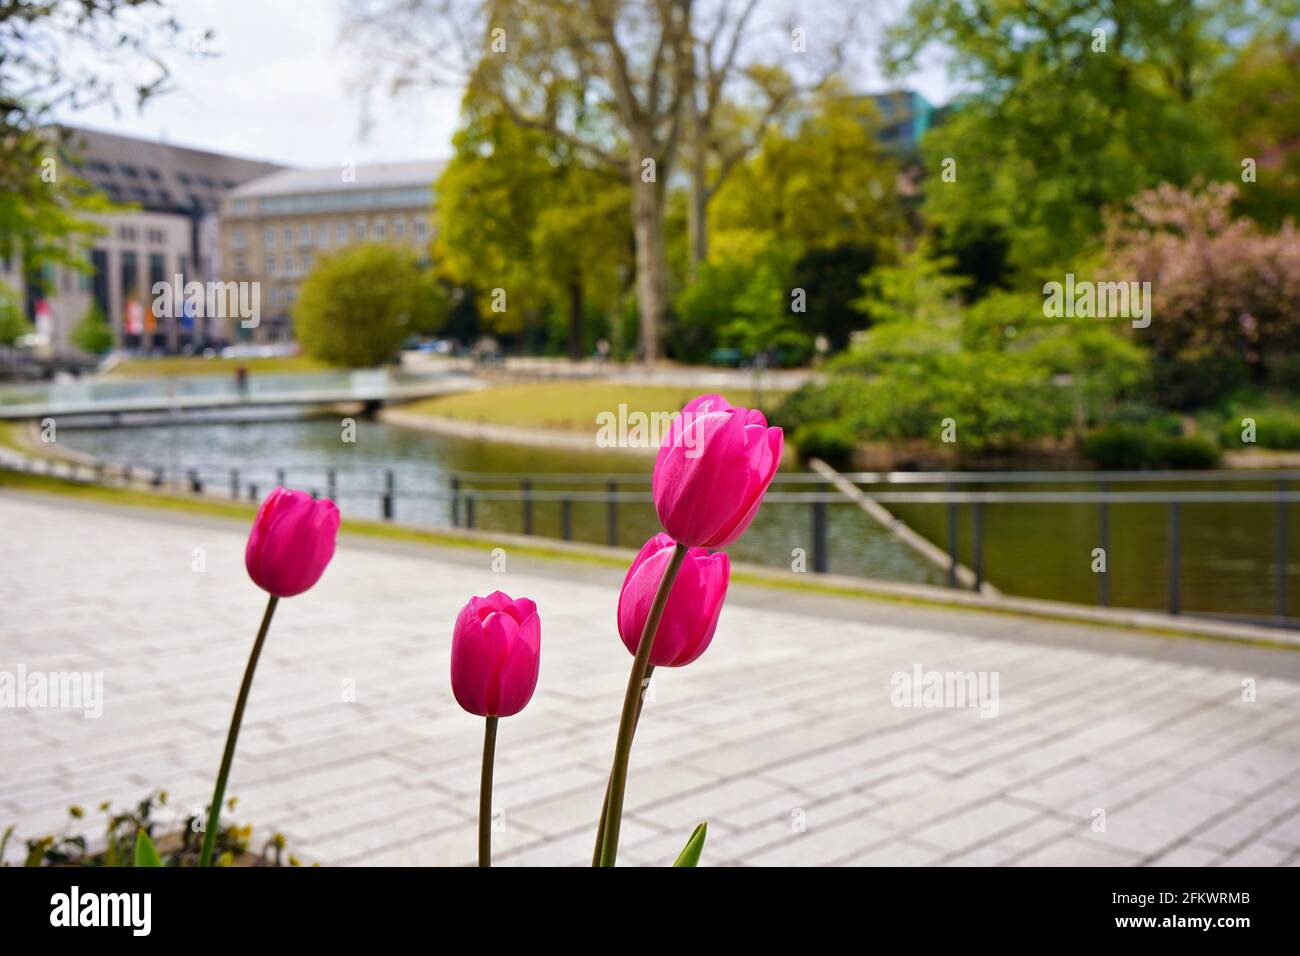 Springtime in Düsseldorf: Pink tulips with the blurred public park 'Hofgarten' in the background. Stock Photo